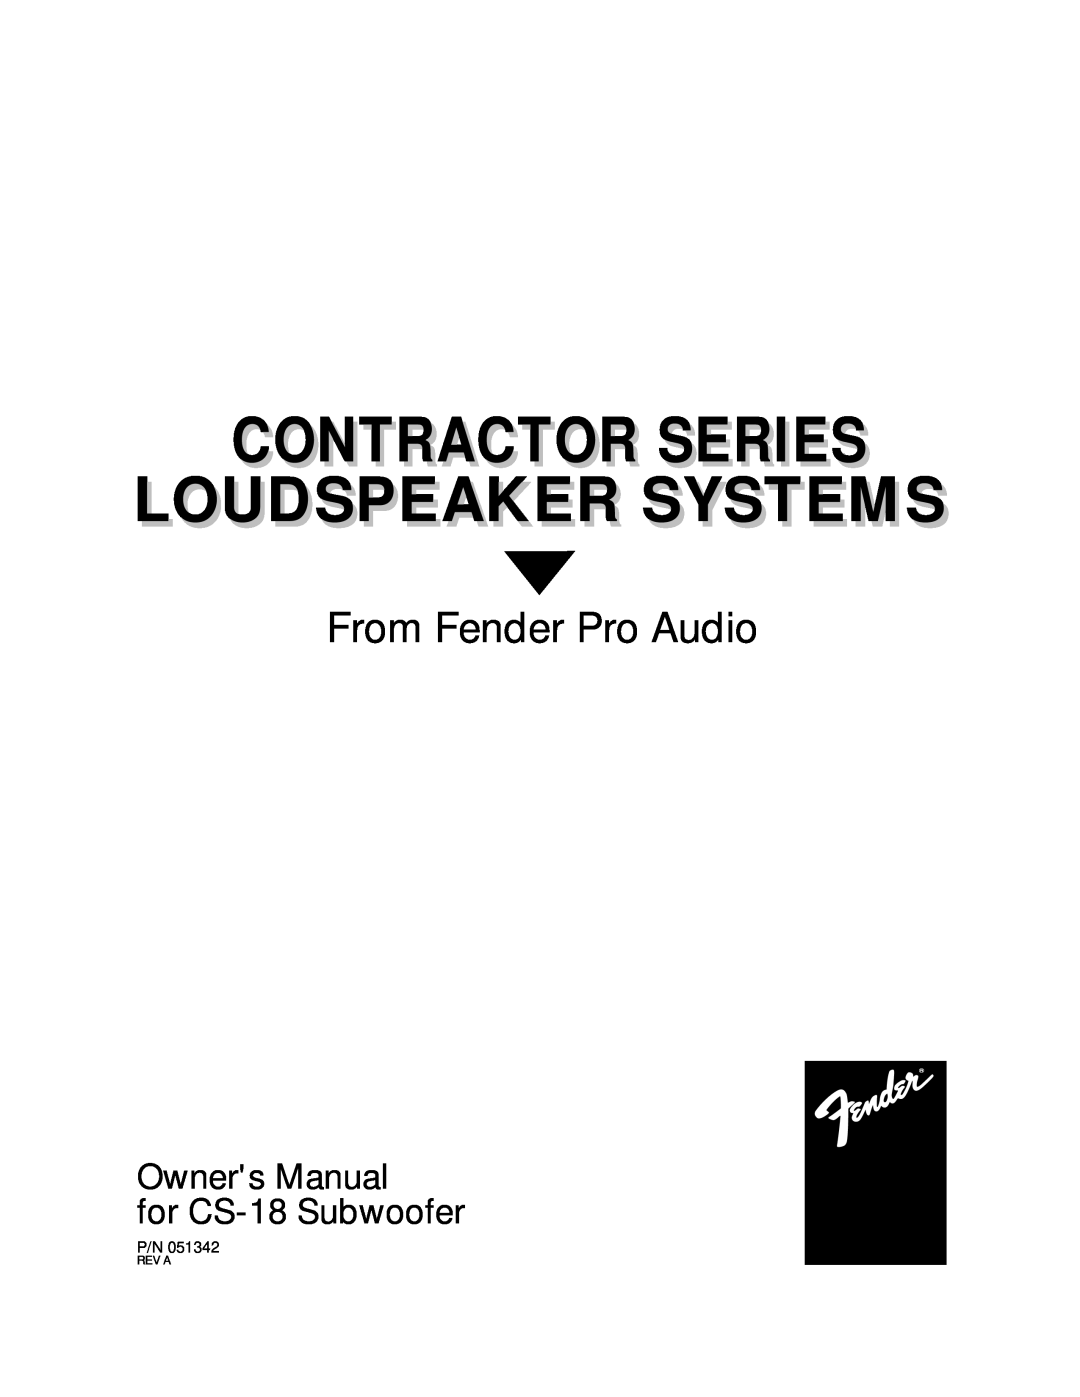 Fender CS-18 owner manual Contractor Series Loudspeaker Systems, From Fender Pro Audio, Rev A 